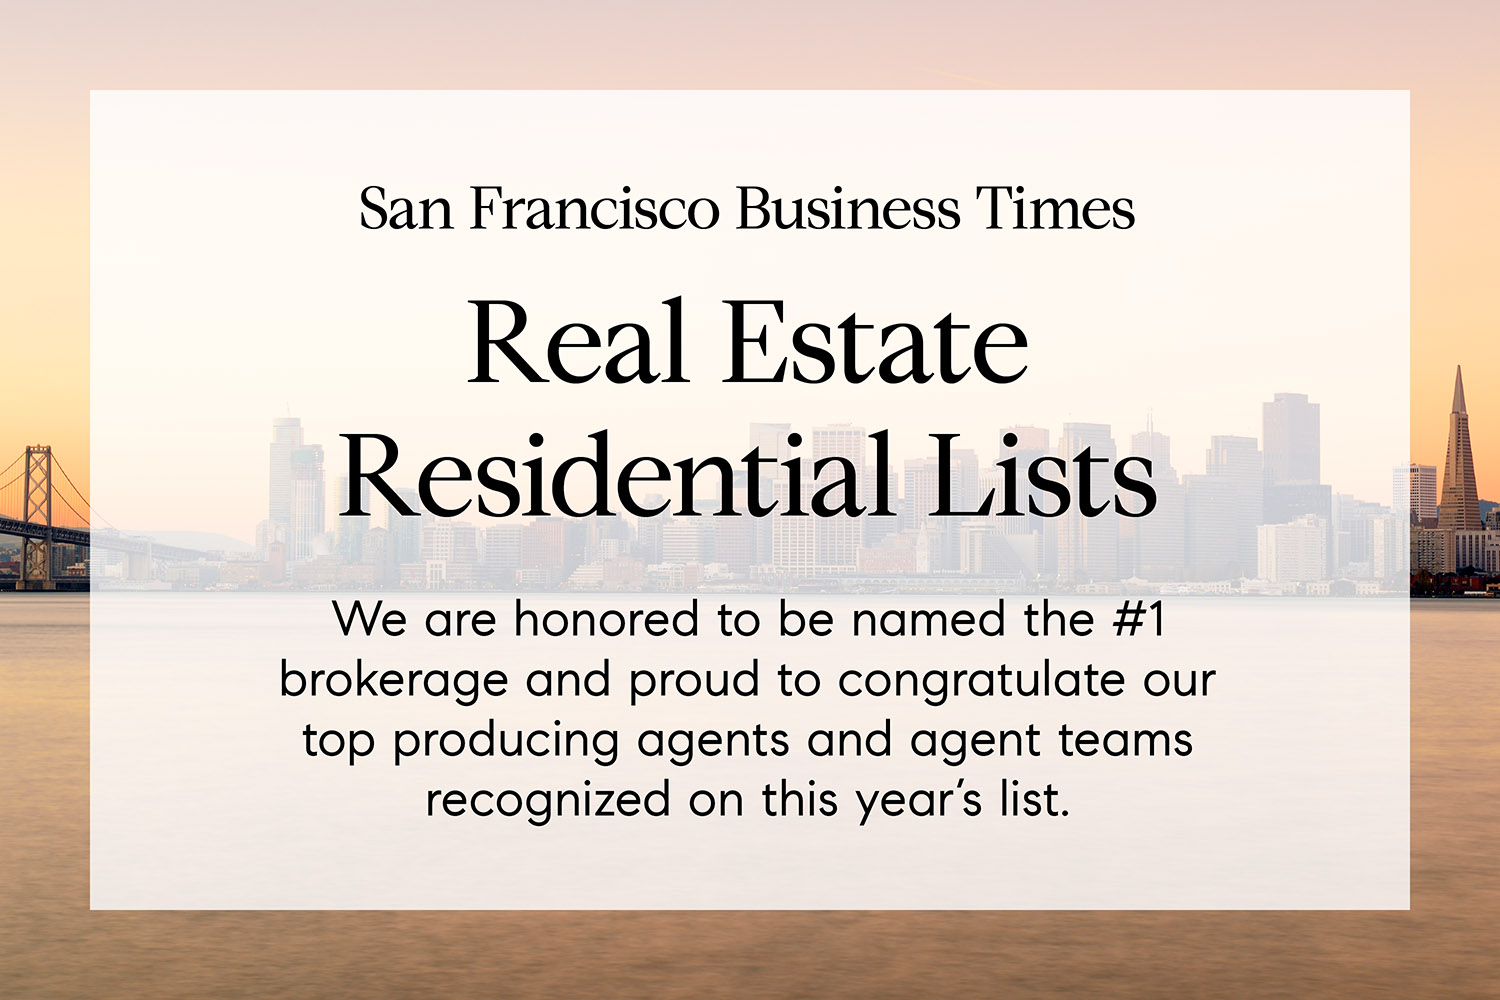 San Francisco Business Times names Compass the 1 Brokerage in the Bay